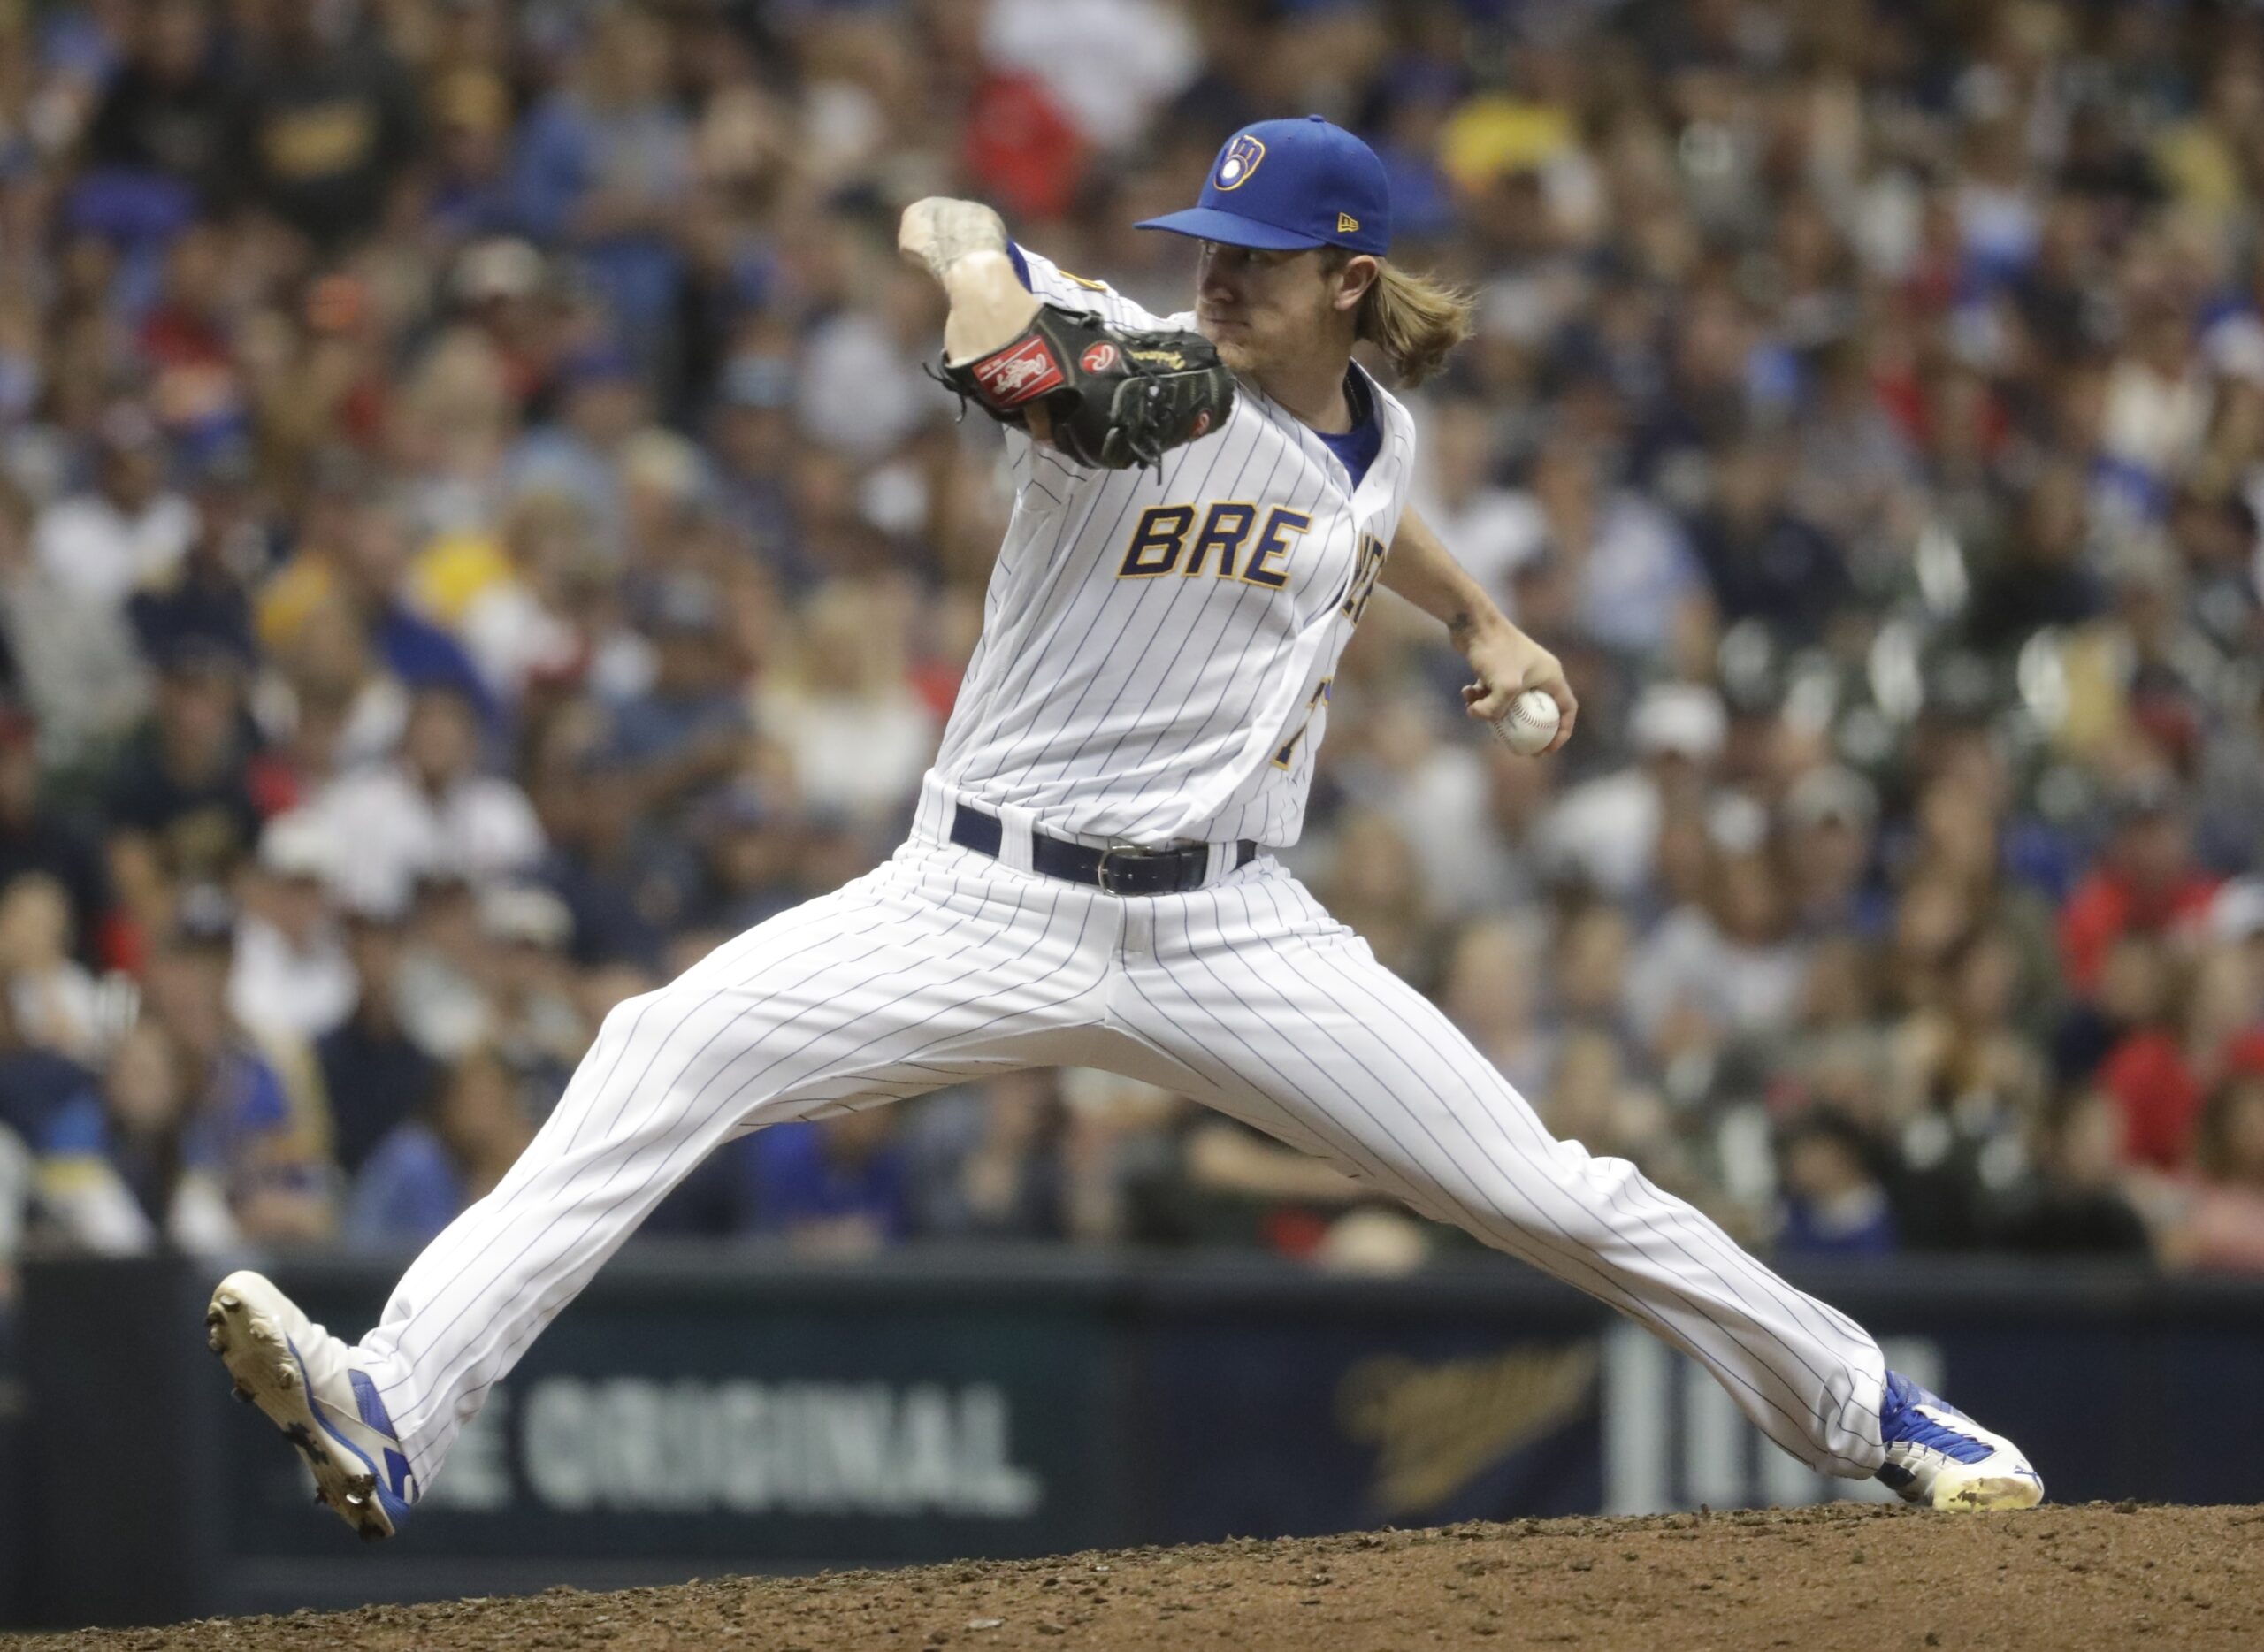 Milwaukee Brewers’ Josh Hader Will Go Through Sensitivity Training After Old, Offensive Tweets Resurface